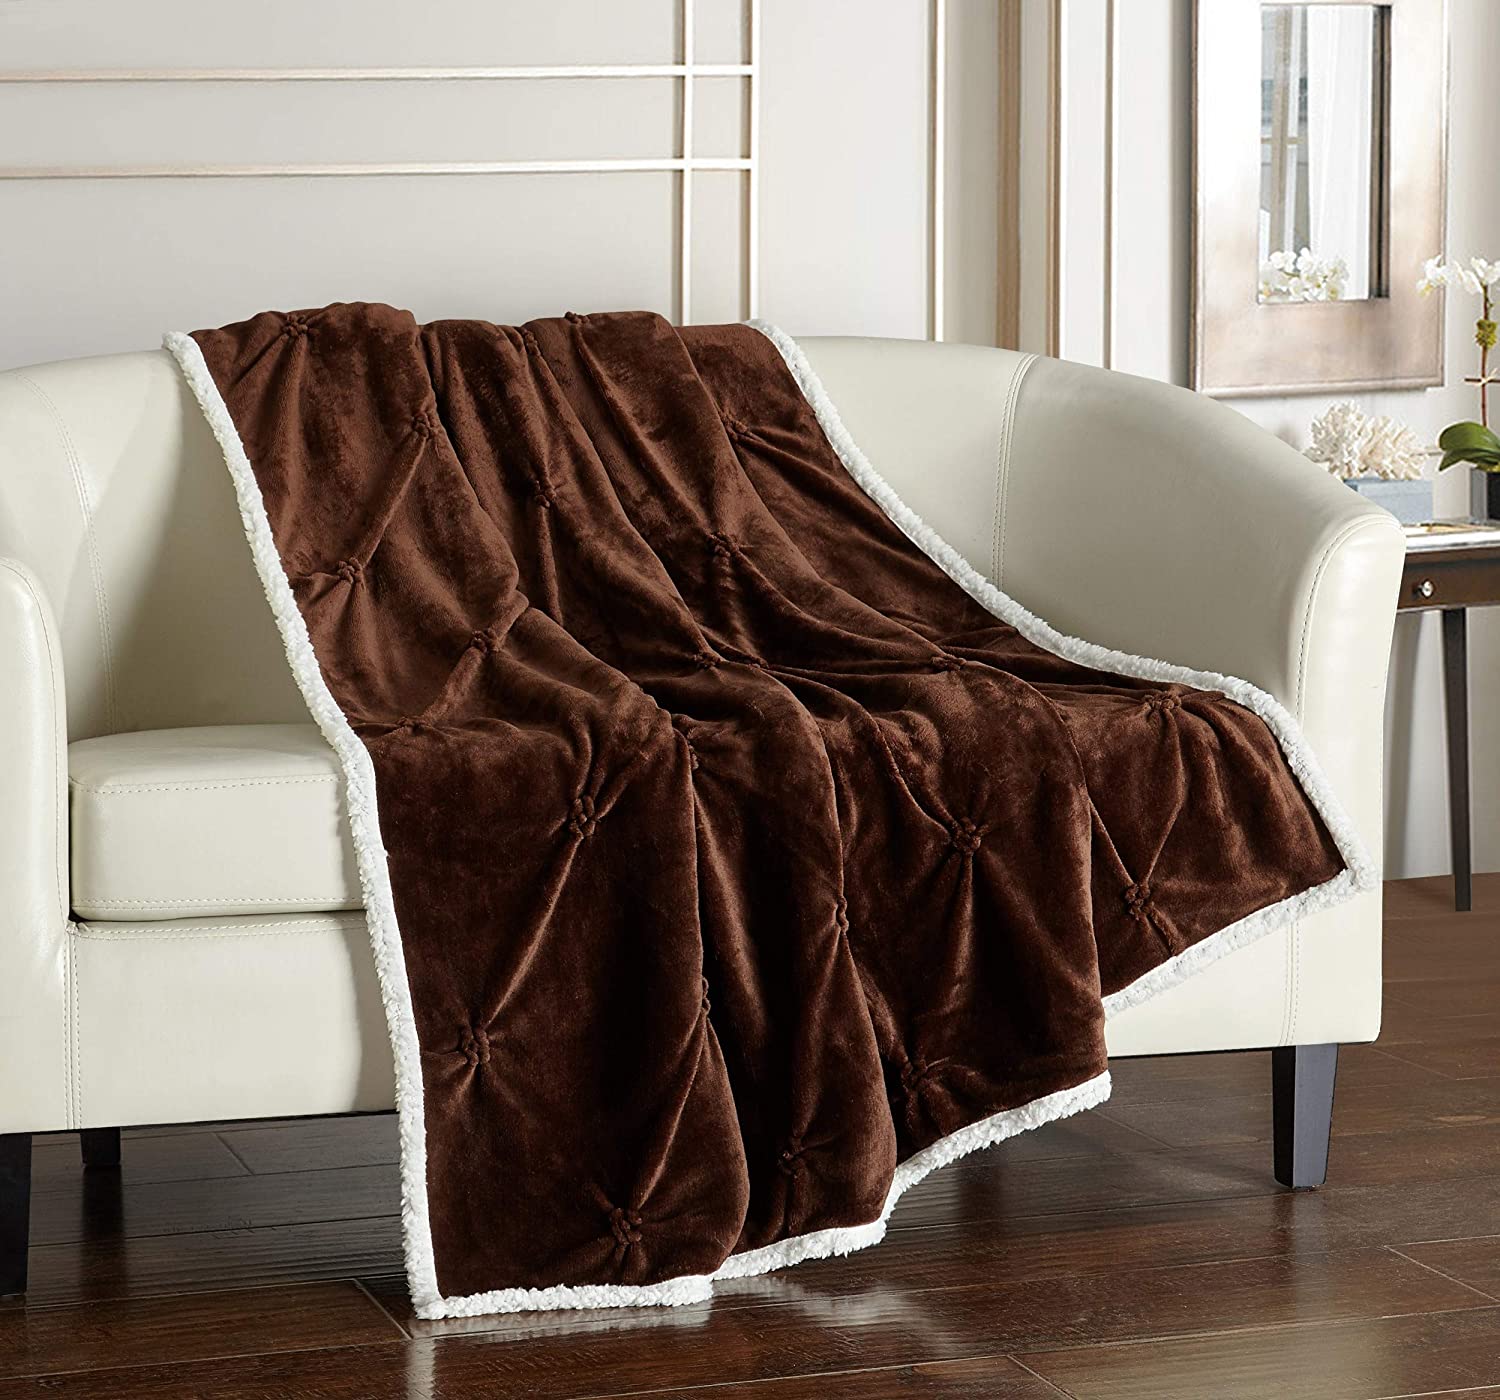 Details about   Chic Home 3 Piece Josepha Pinch Pleated Ruffled & Pintuck Sherpa Lined Comforter 